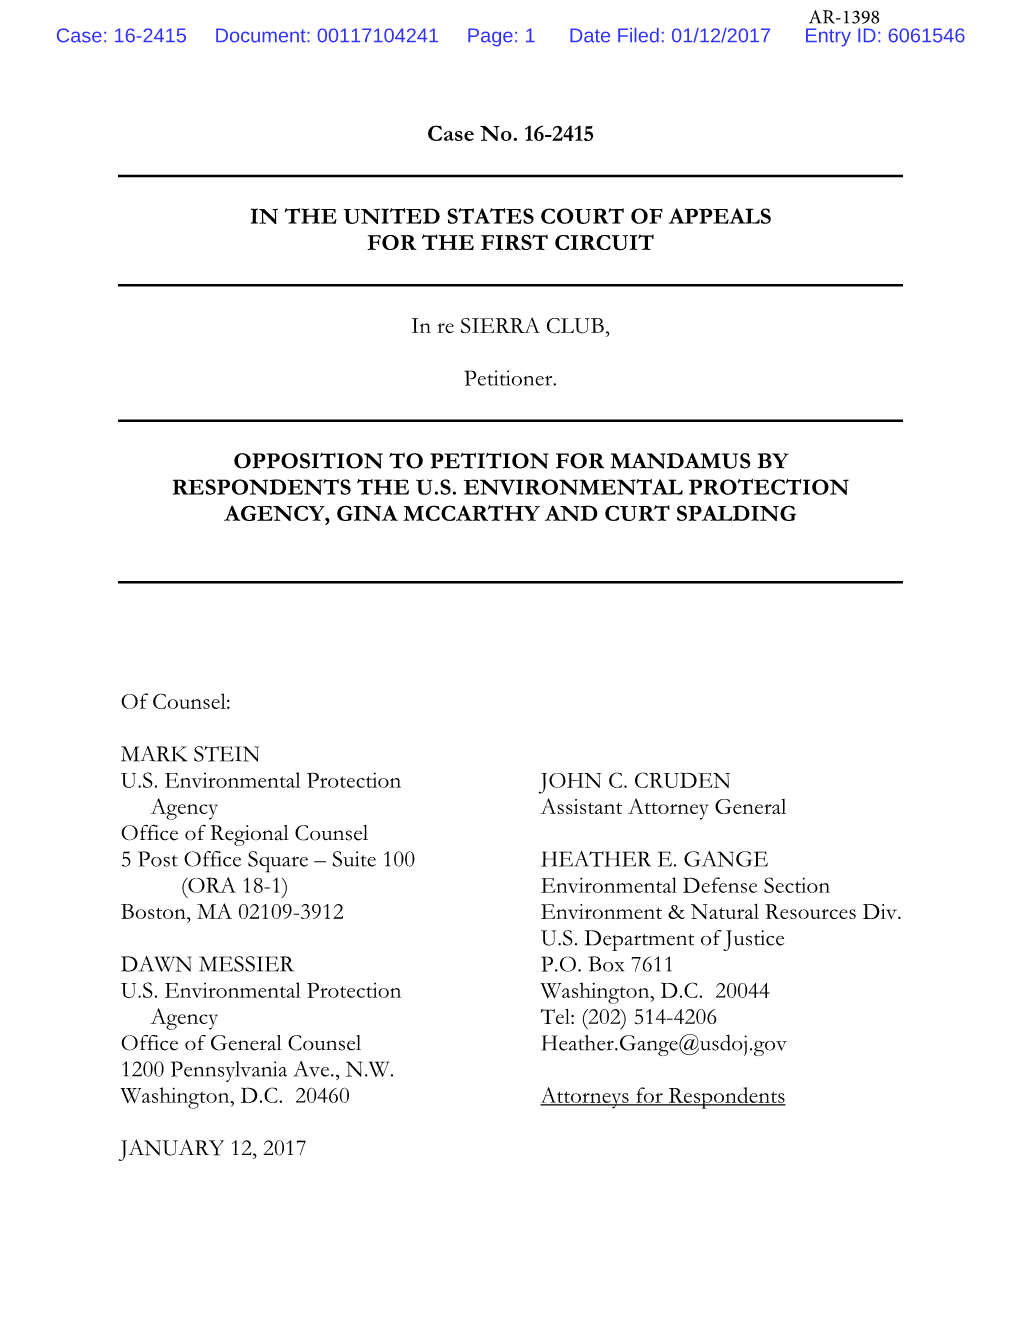 Opposition to Petition for Mandamus by Respondents – the U.S